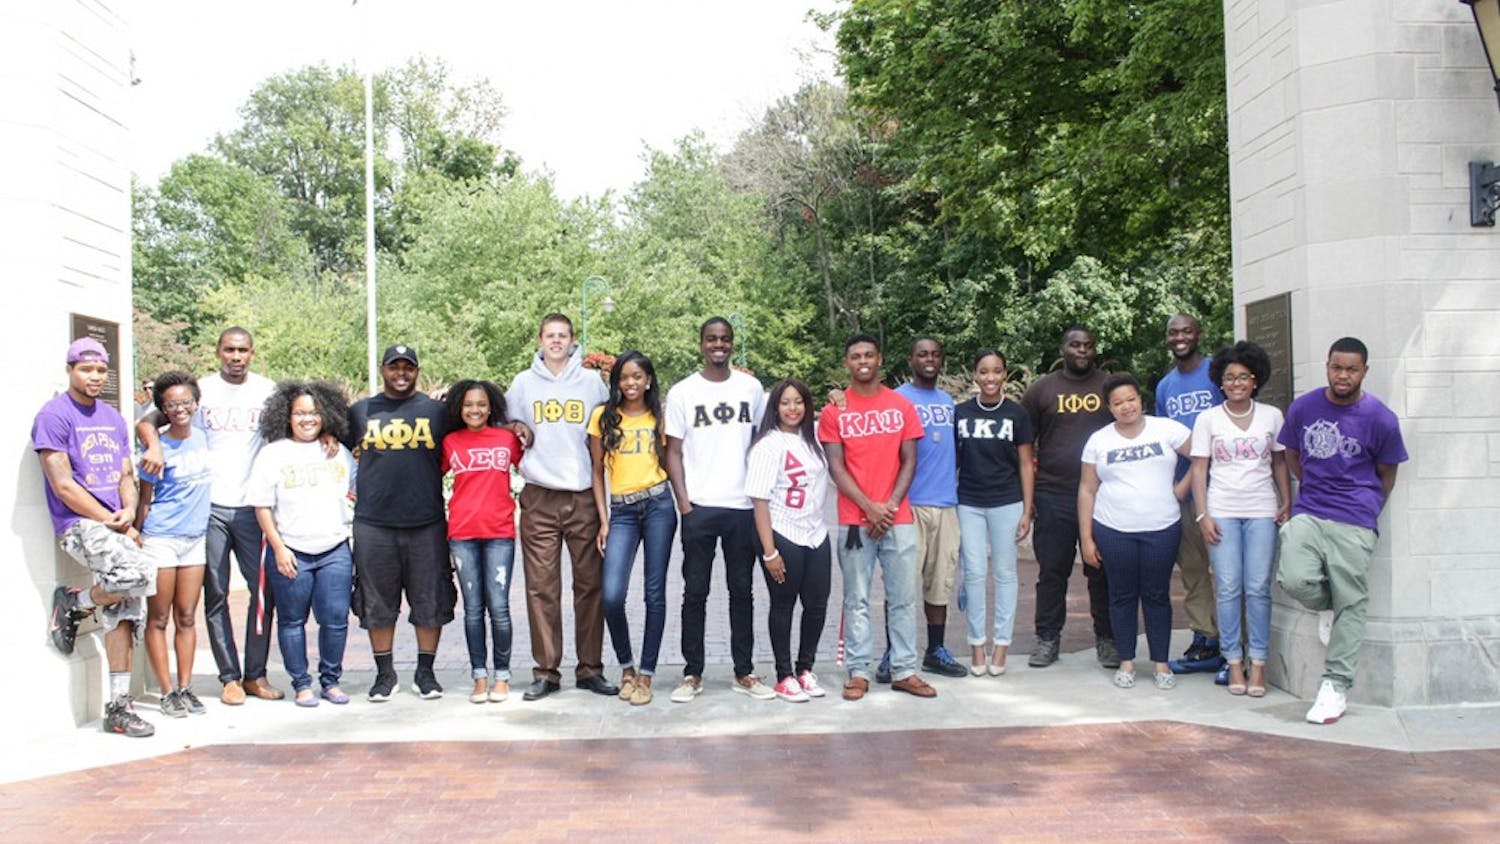 Representatives from the nine historically black fraternities and sororities at IU pose for a photo by Sample Gates. A permanent row of limestone markers will have the names of the United States'&nbsp;nine original black greek chapters &mdash; known as the "Divine Nine" &mdash;&nbsp;arranged in an arc along the sidewalk that leads to the entrance of the Neal-Marshall Black Culture Center building.